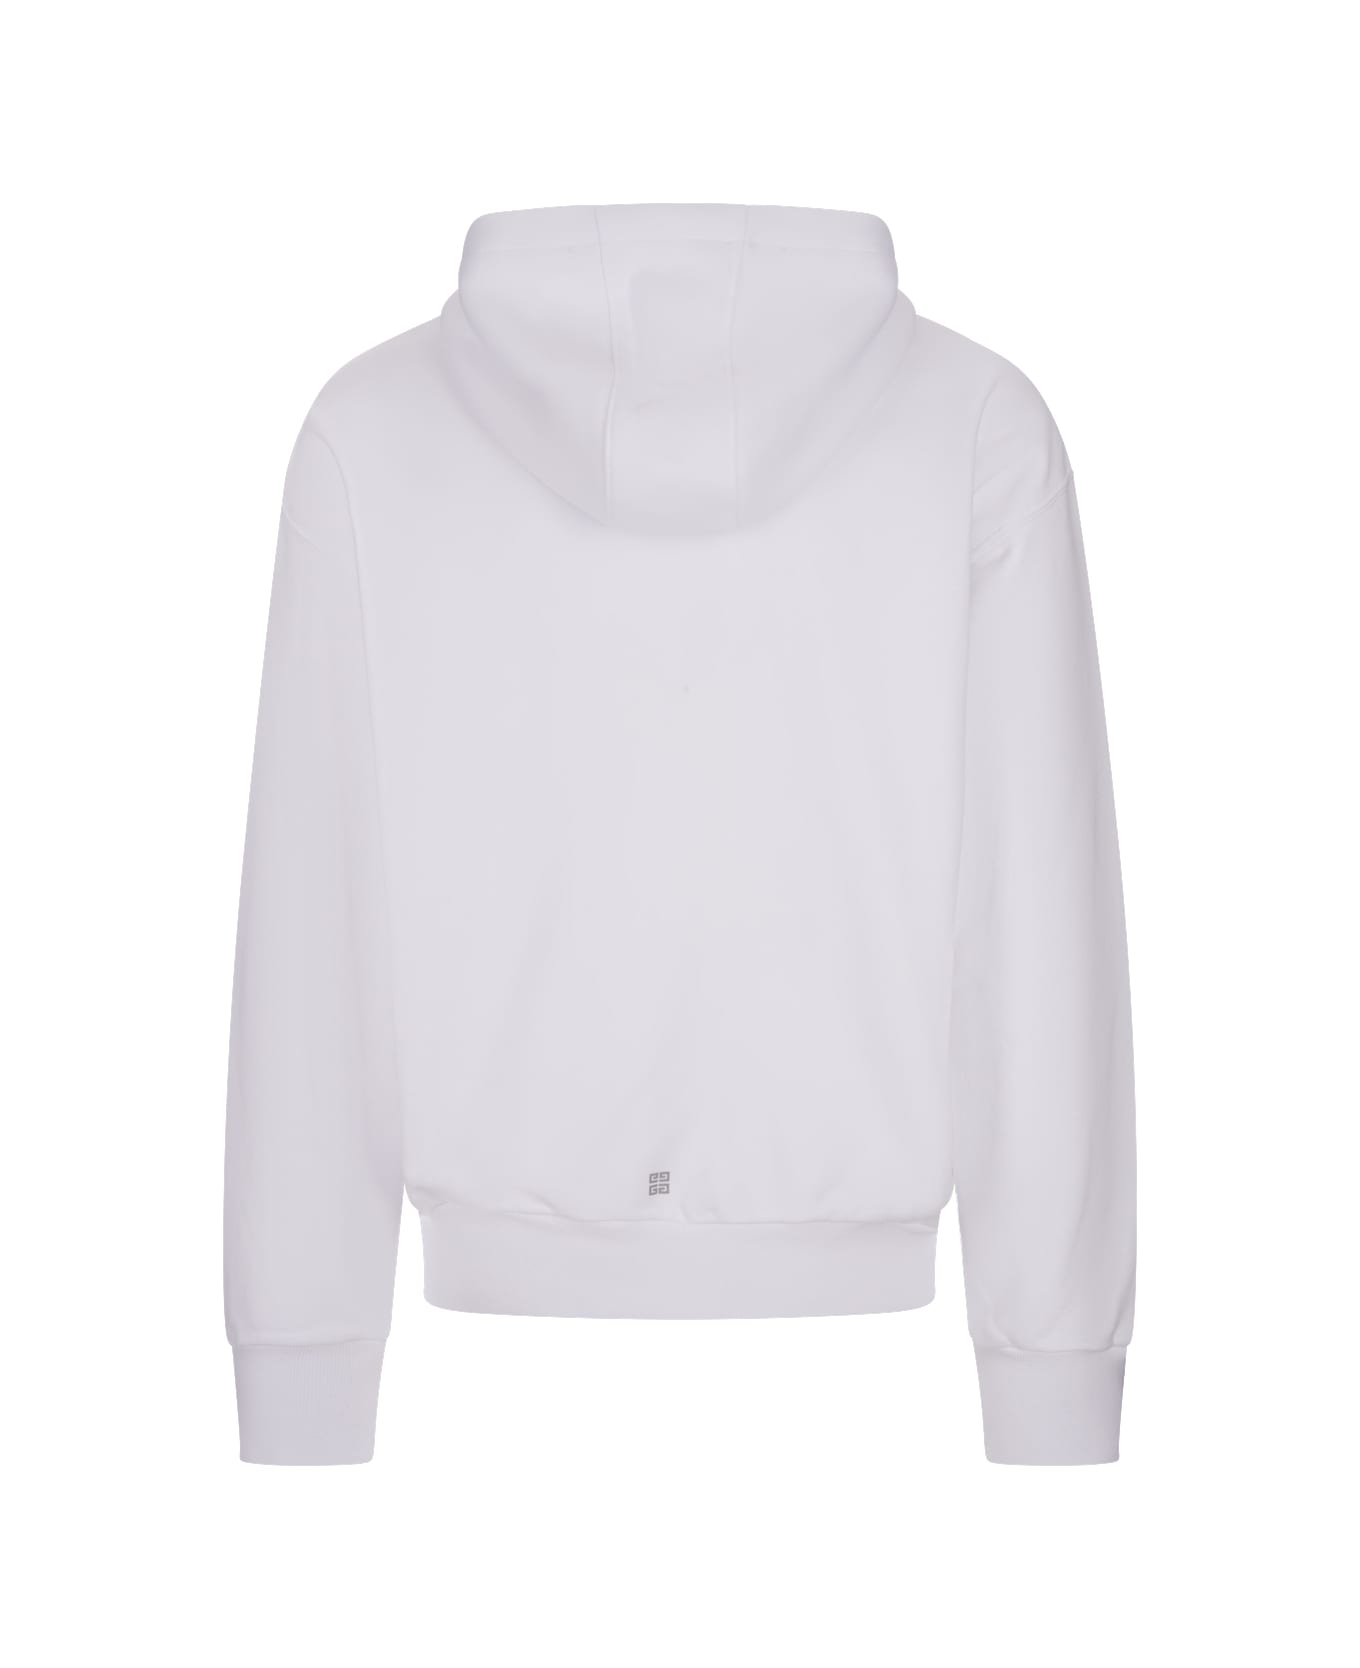 Givenchy White Givenchy Hoodie With Print - White フリース